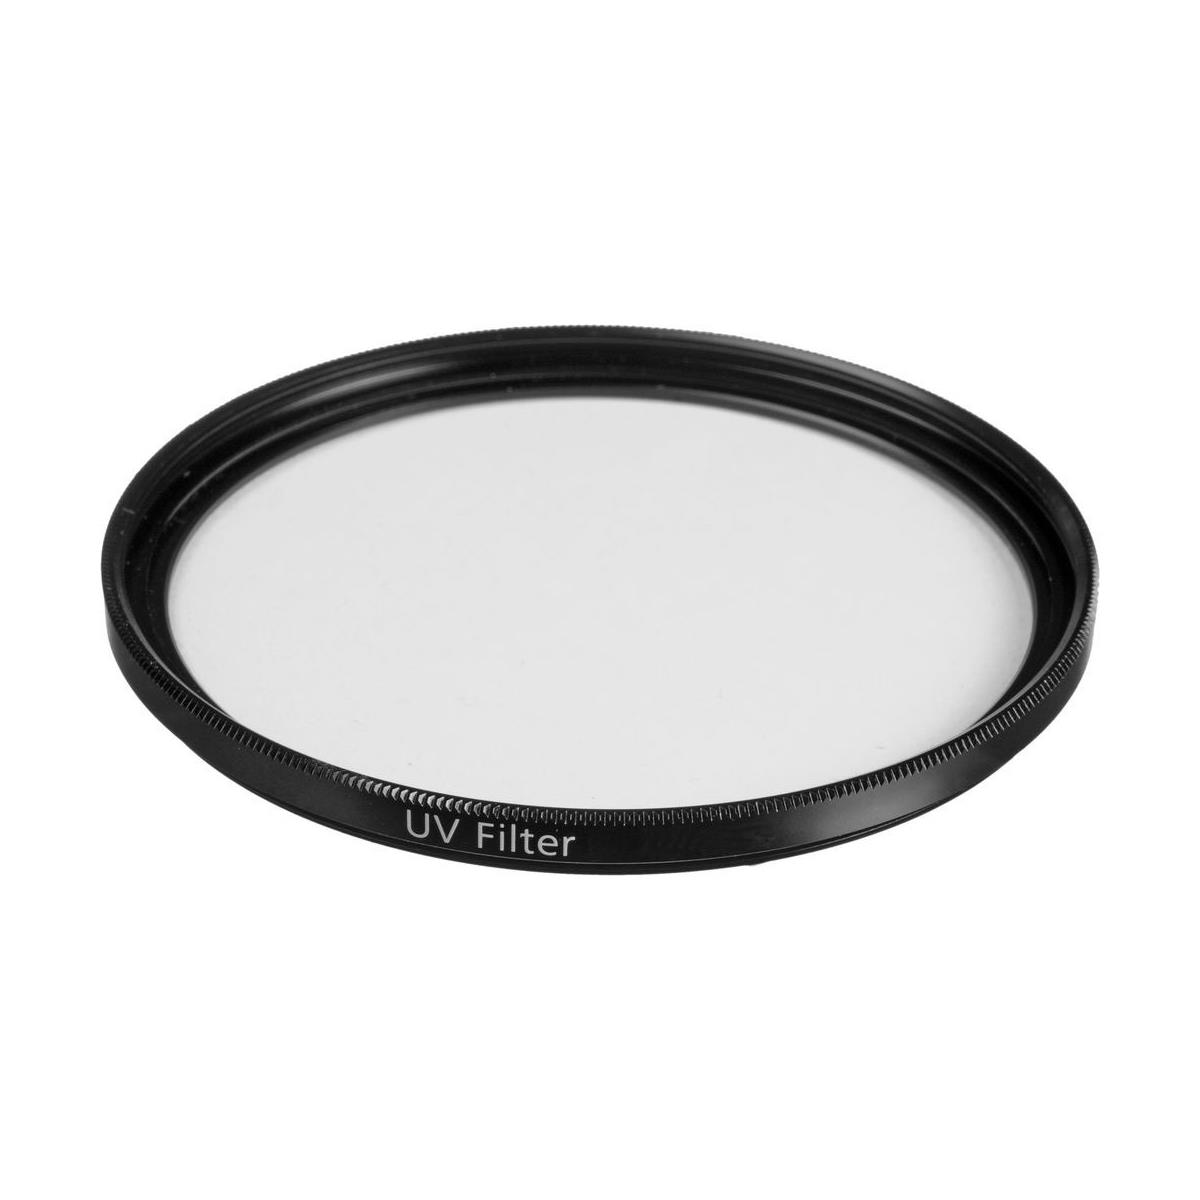 Zeiss 55mm T* Coated UV Filter